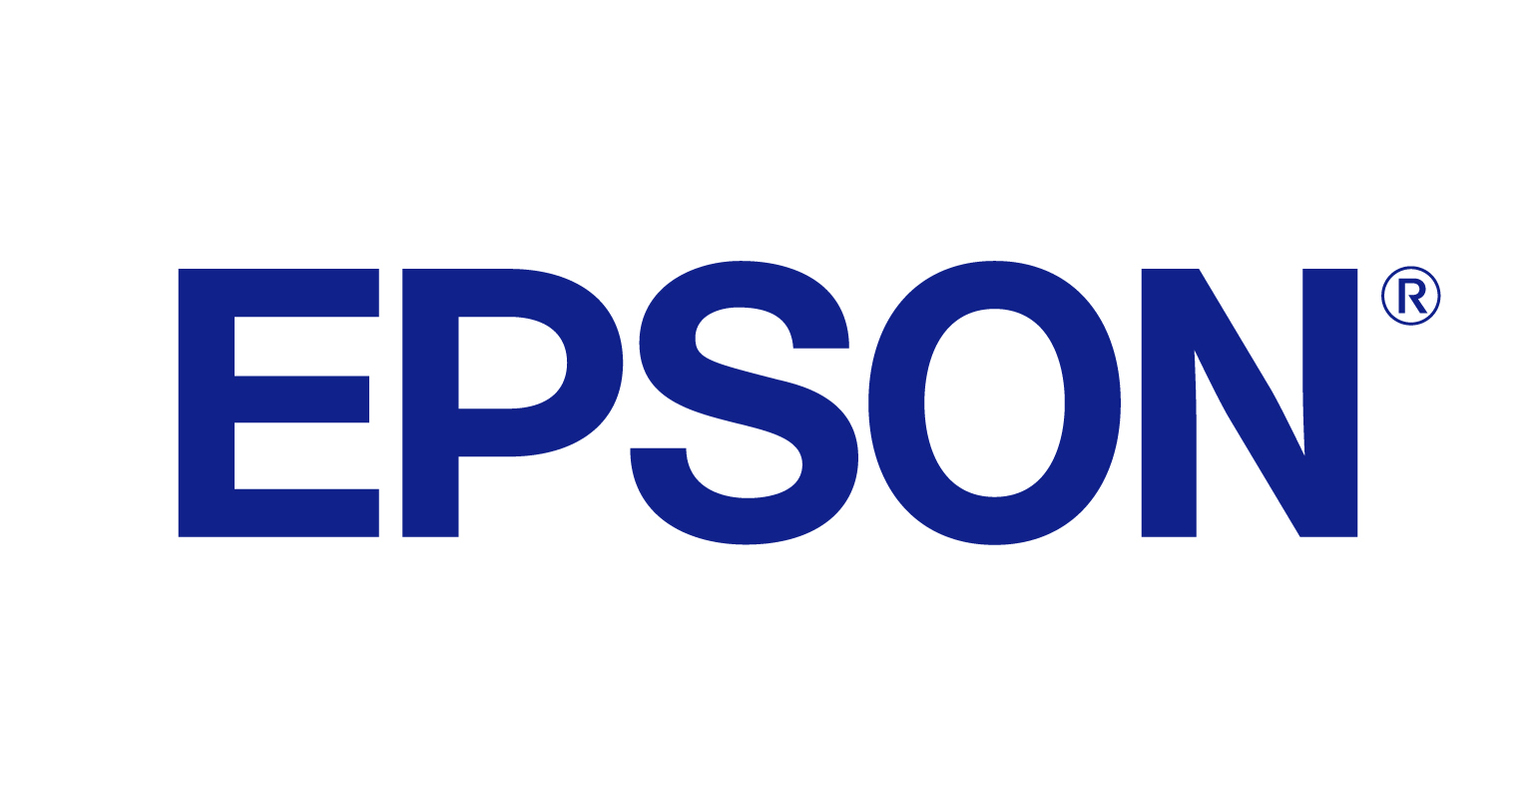 Epson WF-7515 Printer in SE28 London for £20.00 for sale